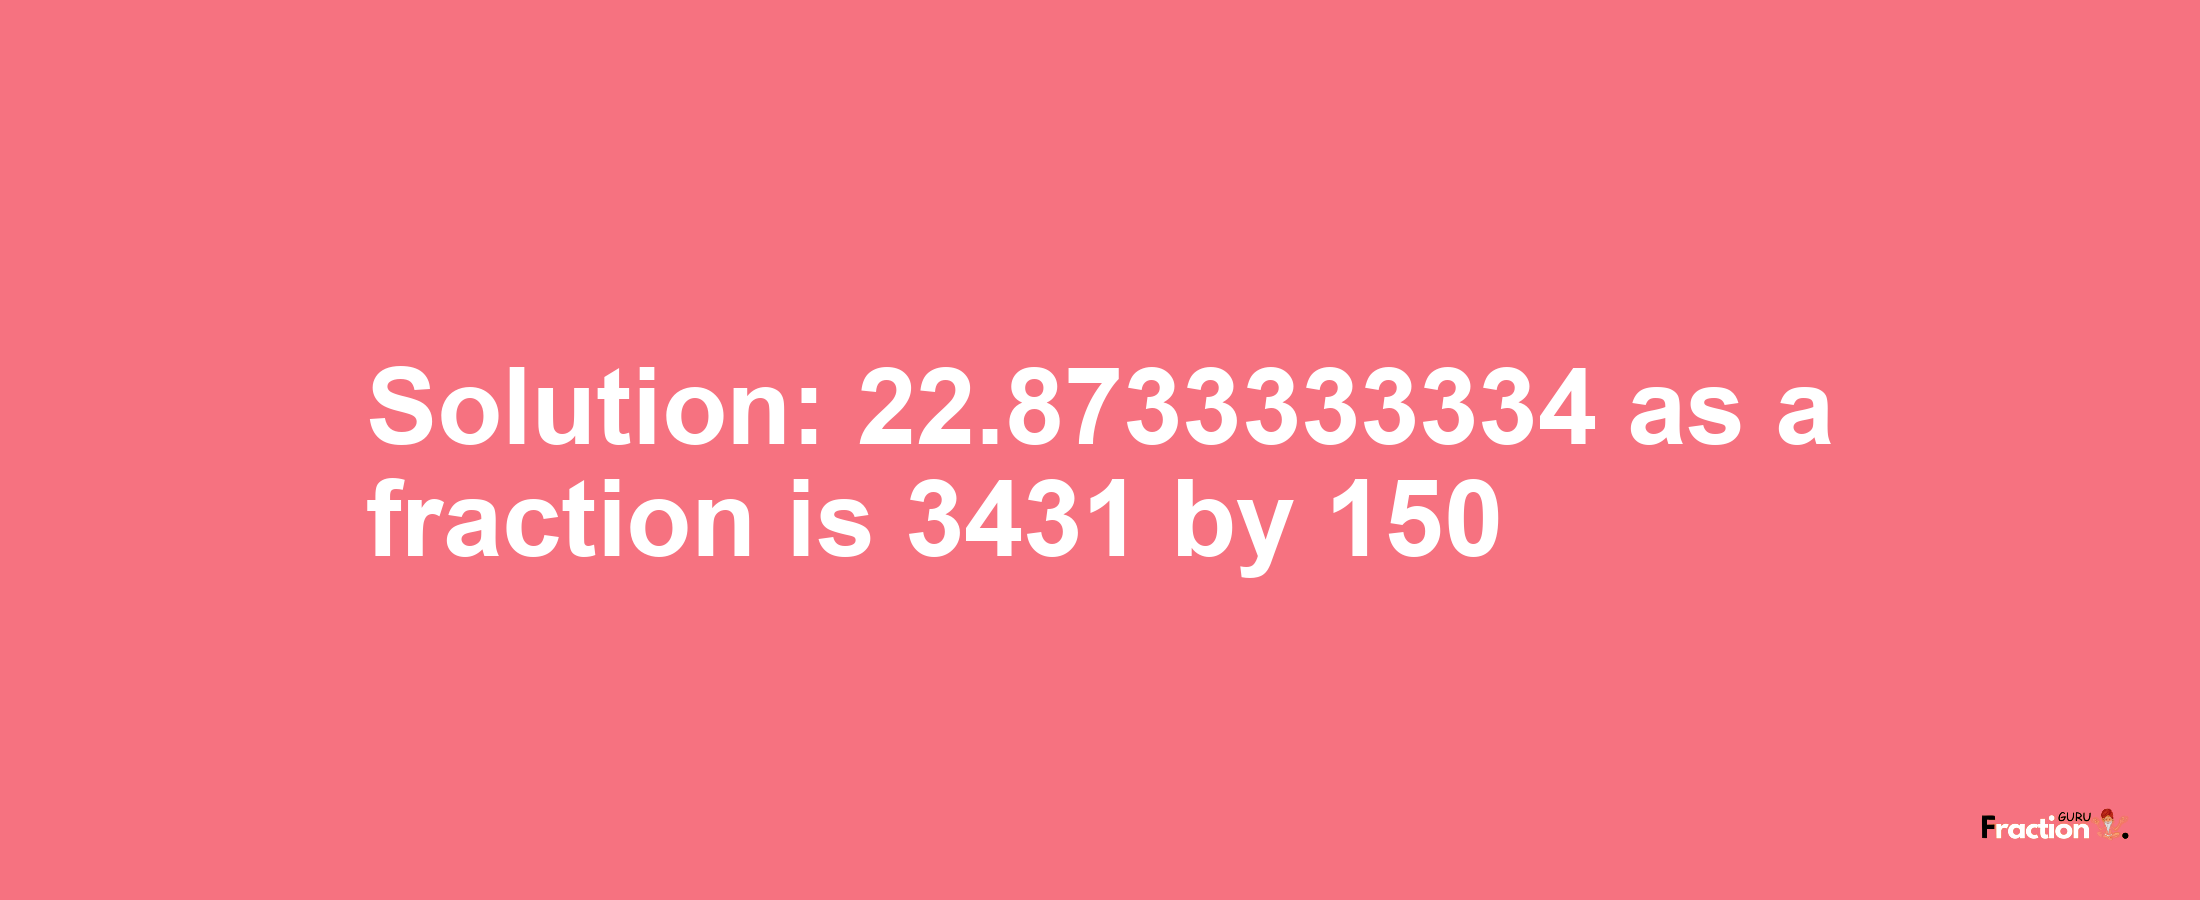 Solution:22.8733333334 as a fraction is 3431/150